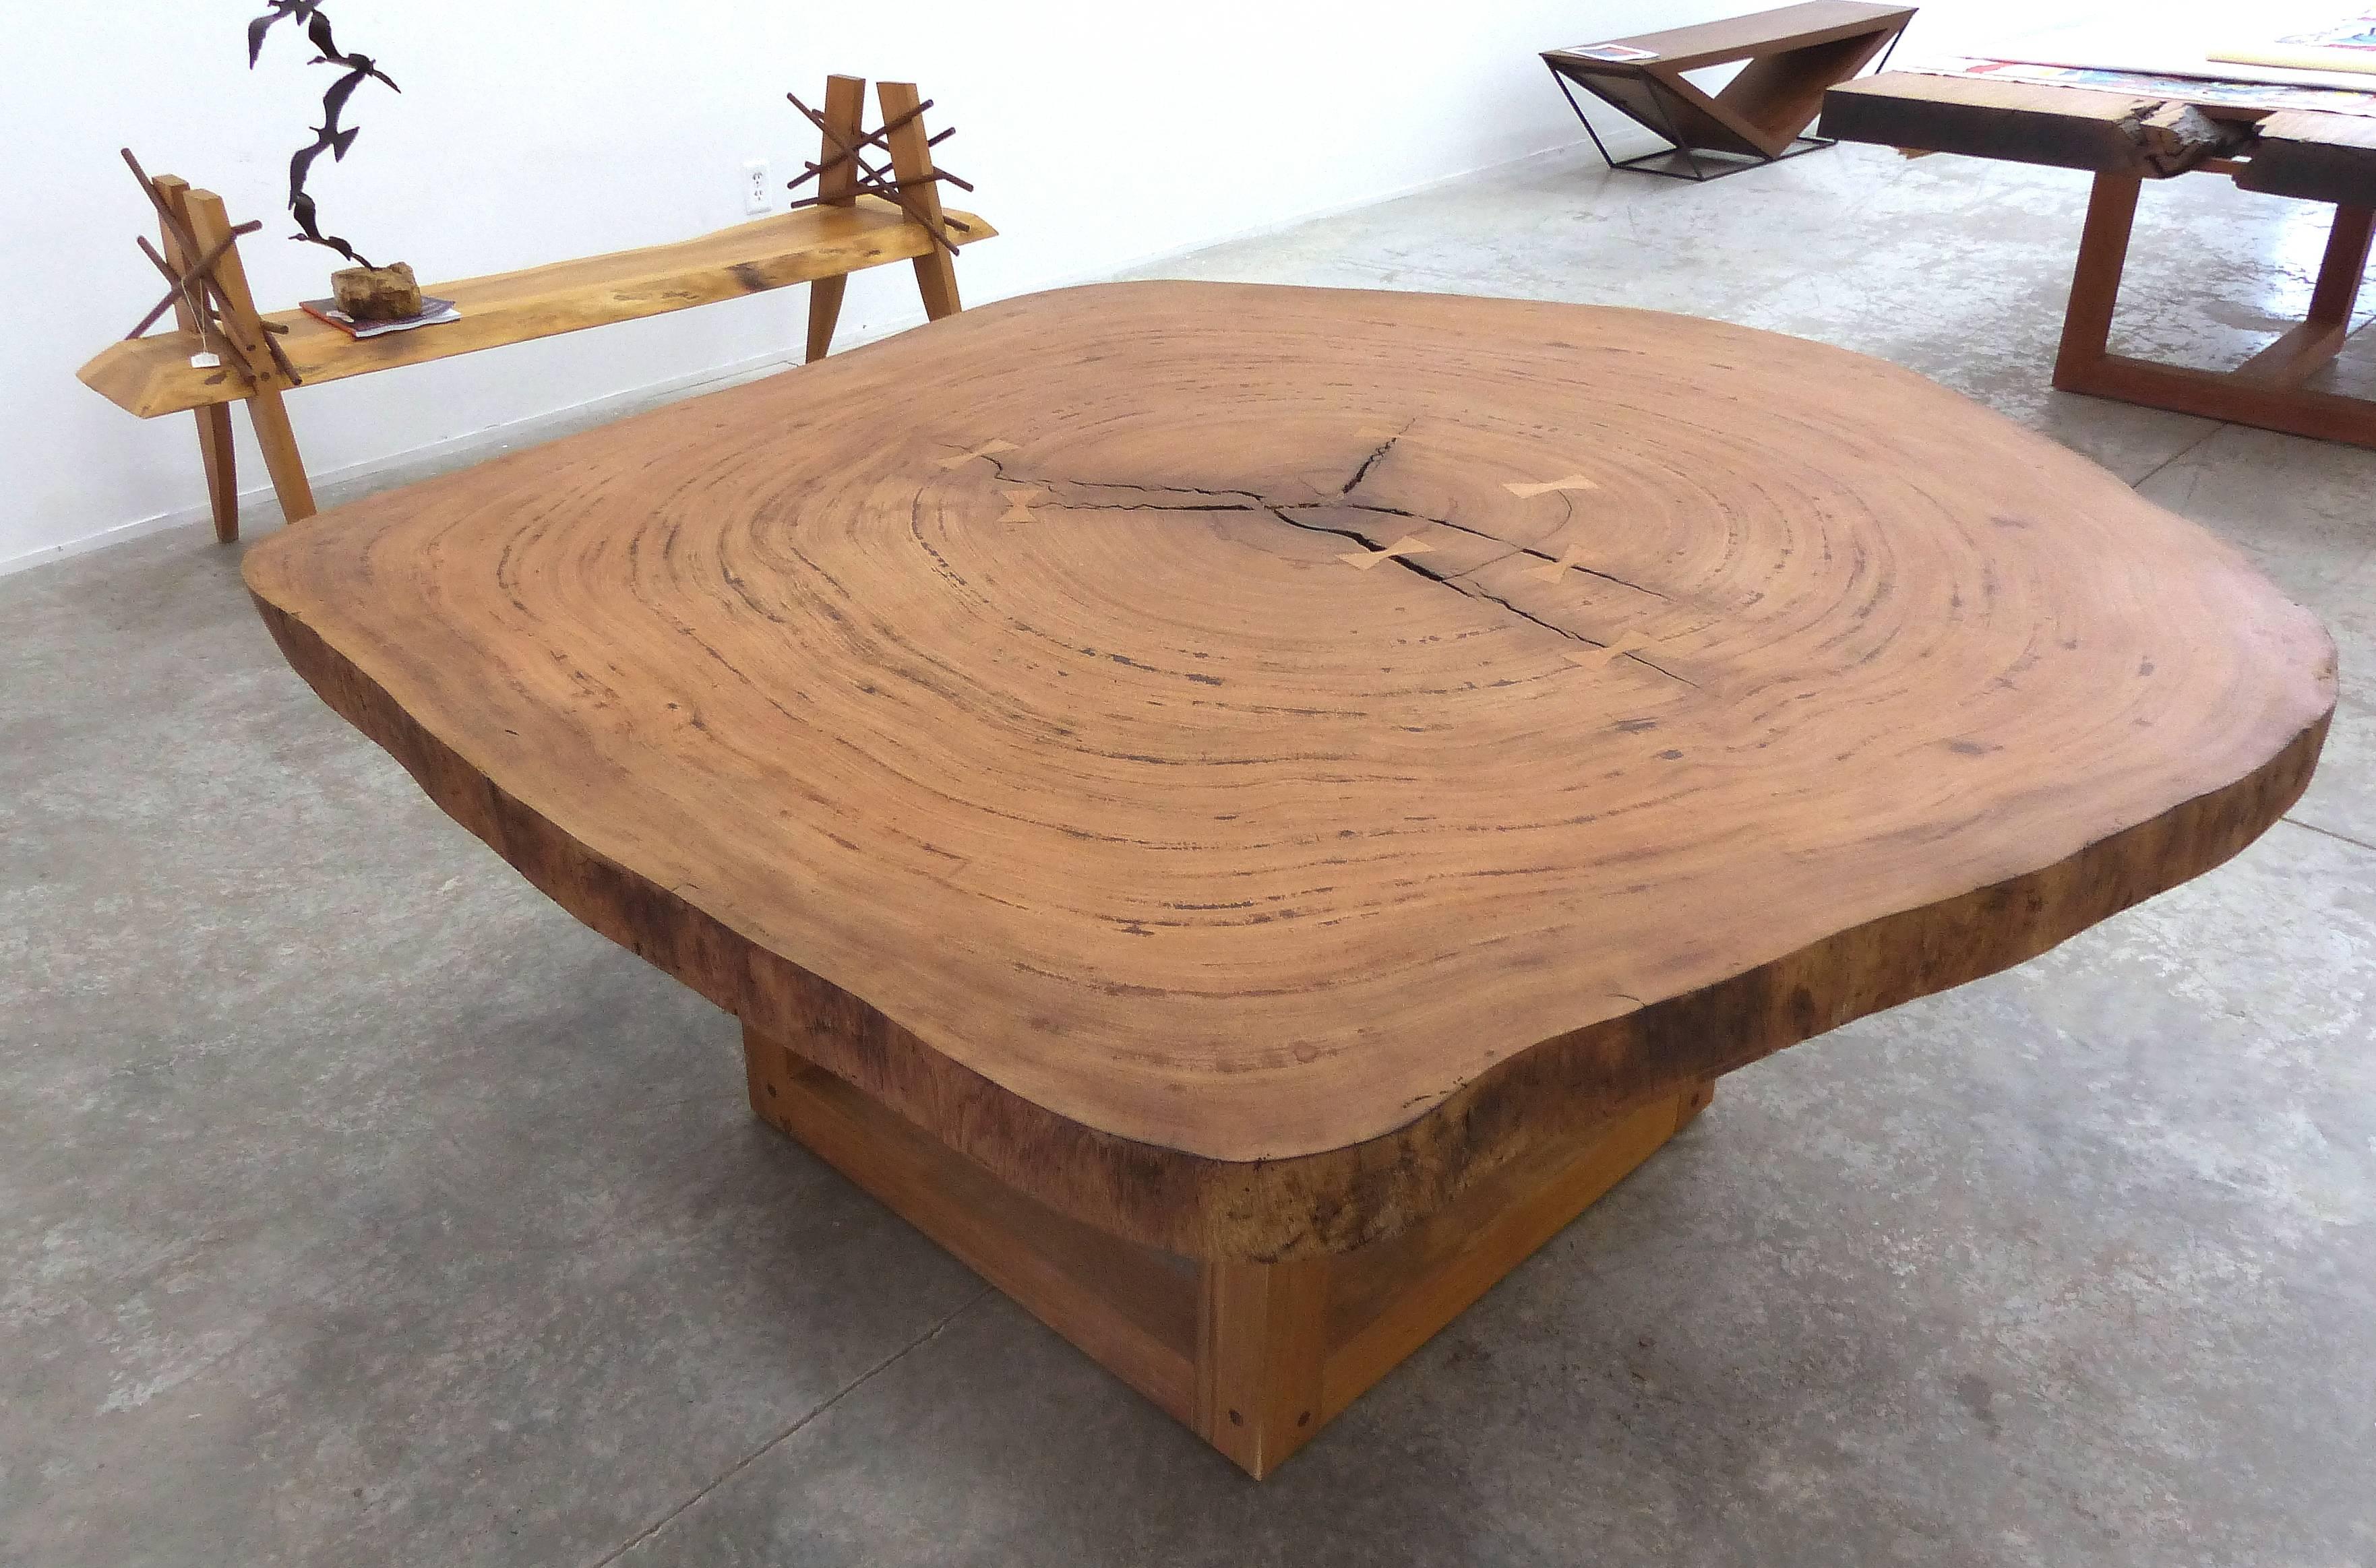 Organic Dining Table by Valeria Totti, Reclaimed Wood from the Brazilian Amazon

Offered for sale is a large, organic dining table designed by the Brazilian artist Valeria Totti using reclaimed wood from the Brazilian Amazon. The type of wood is